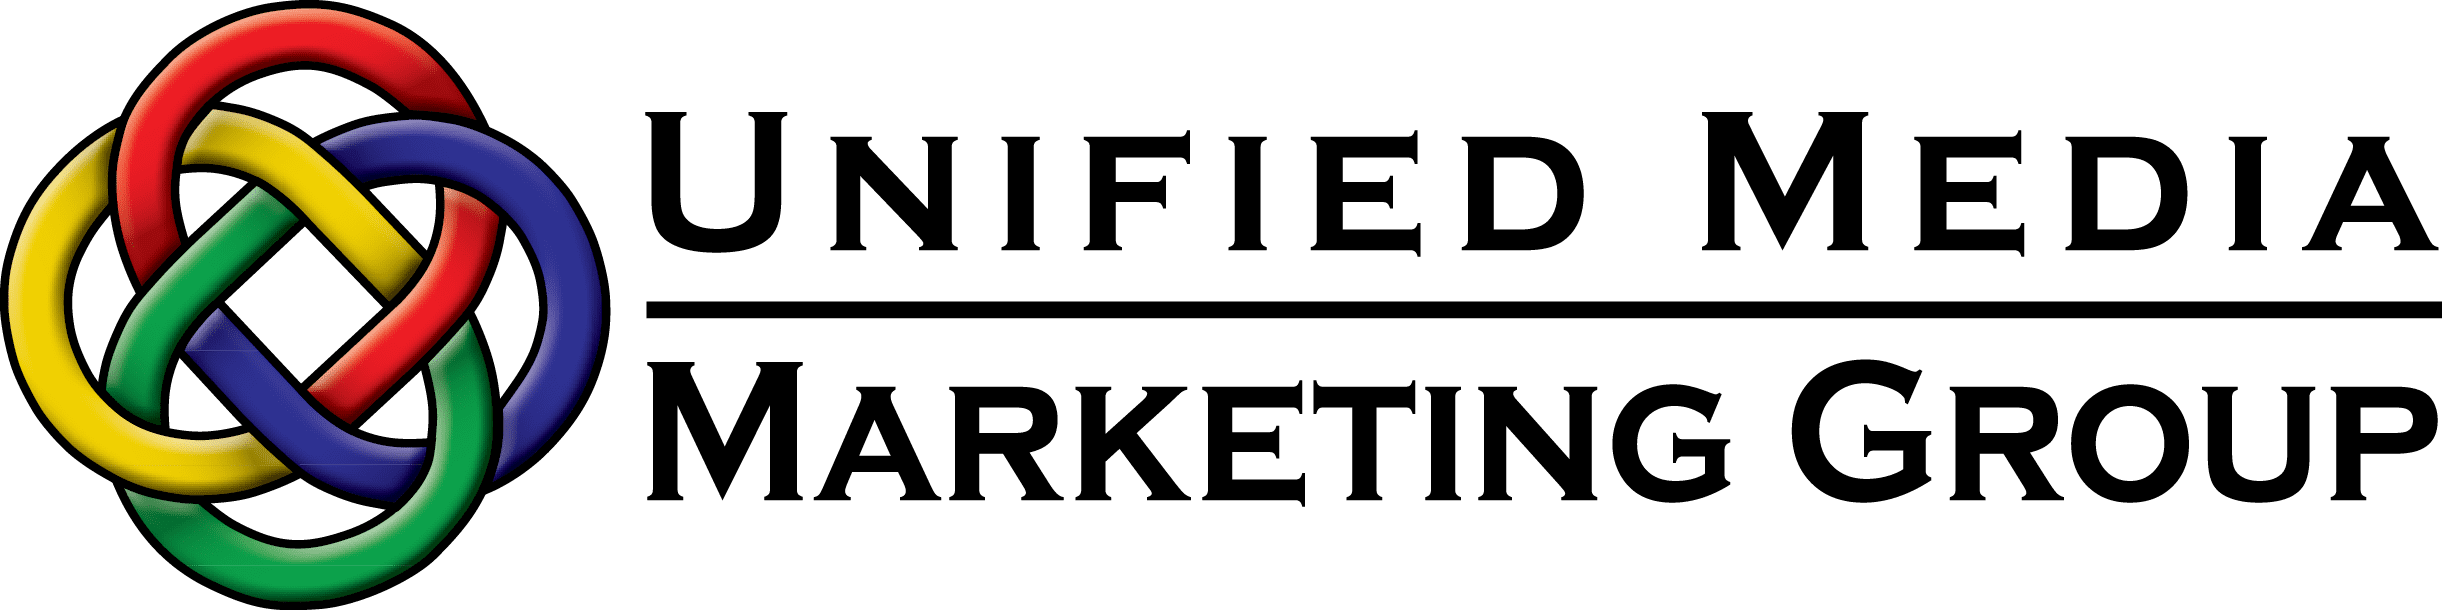 Unified Media Marketing Group